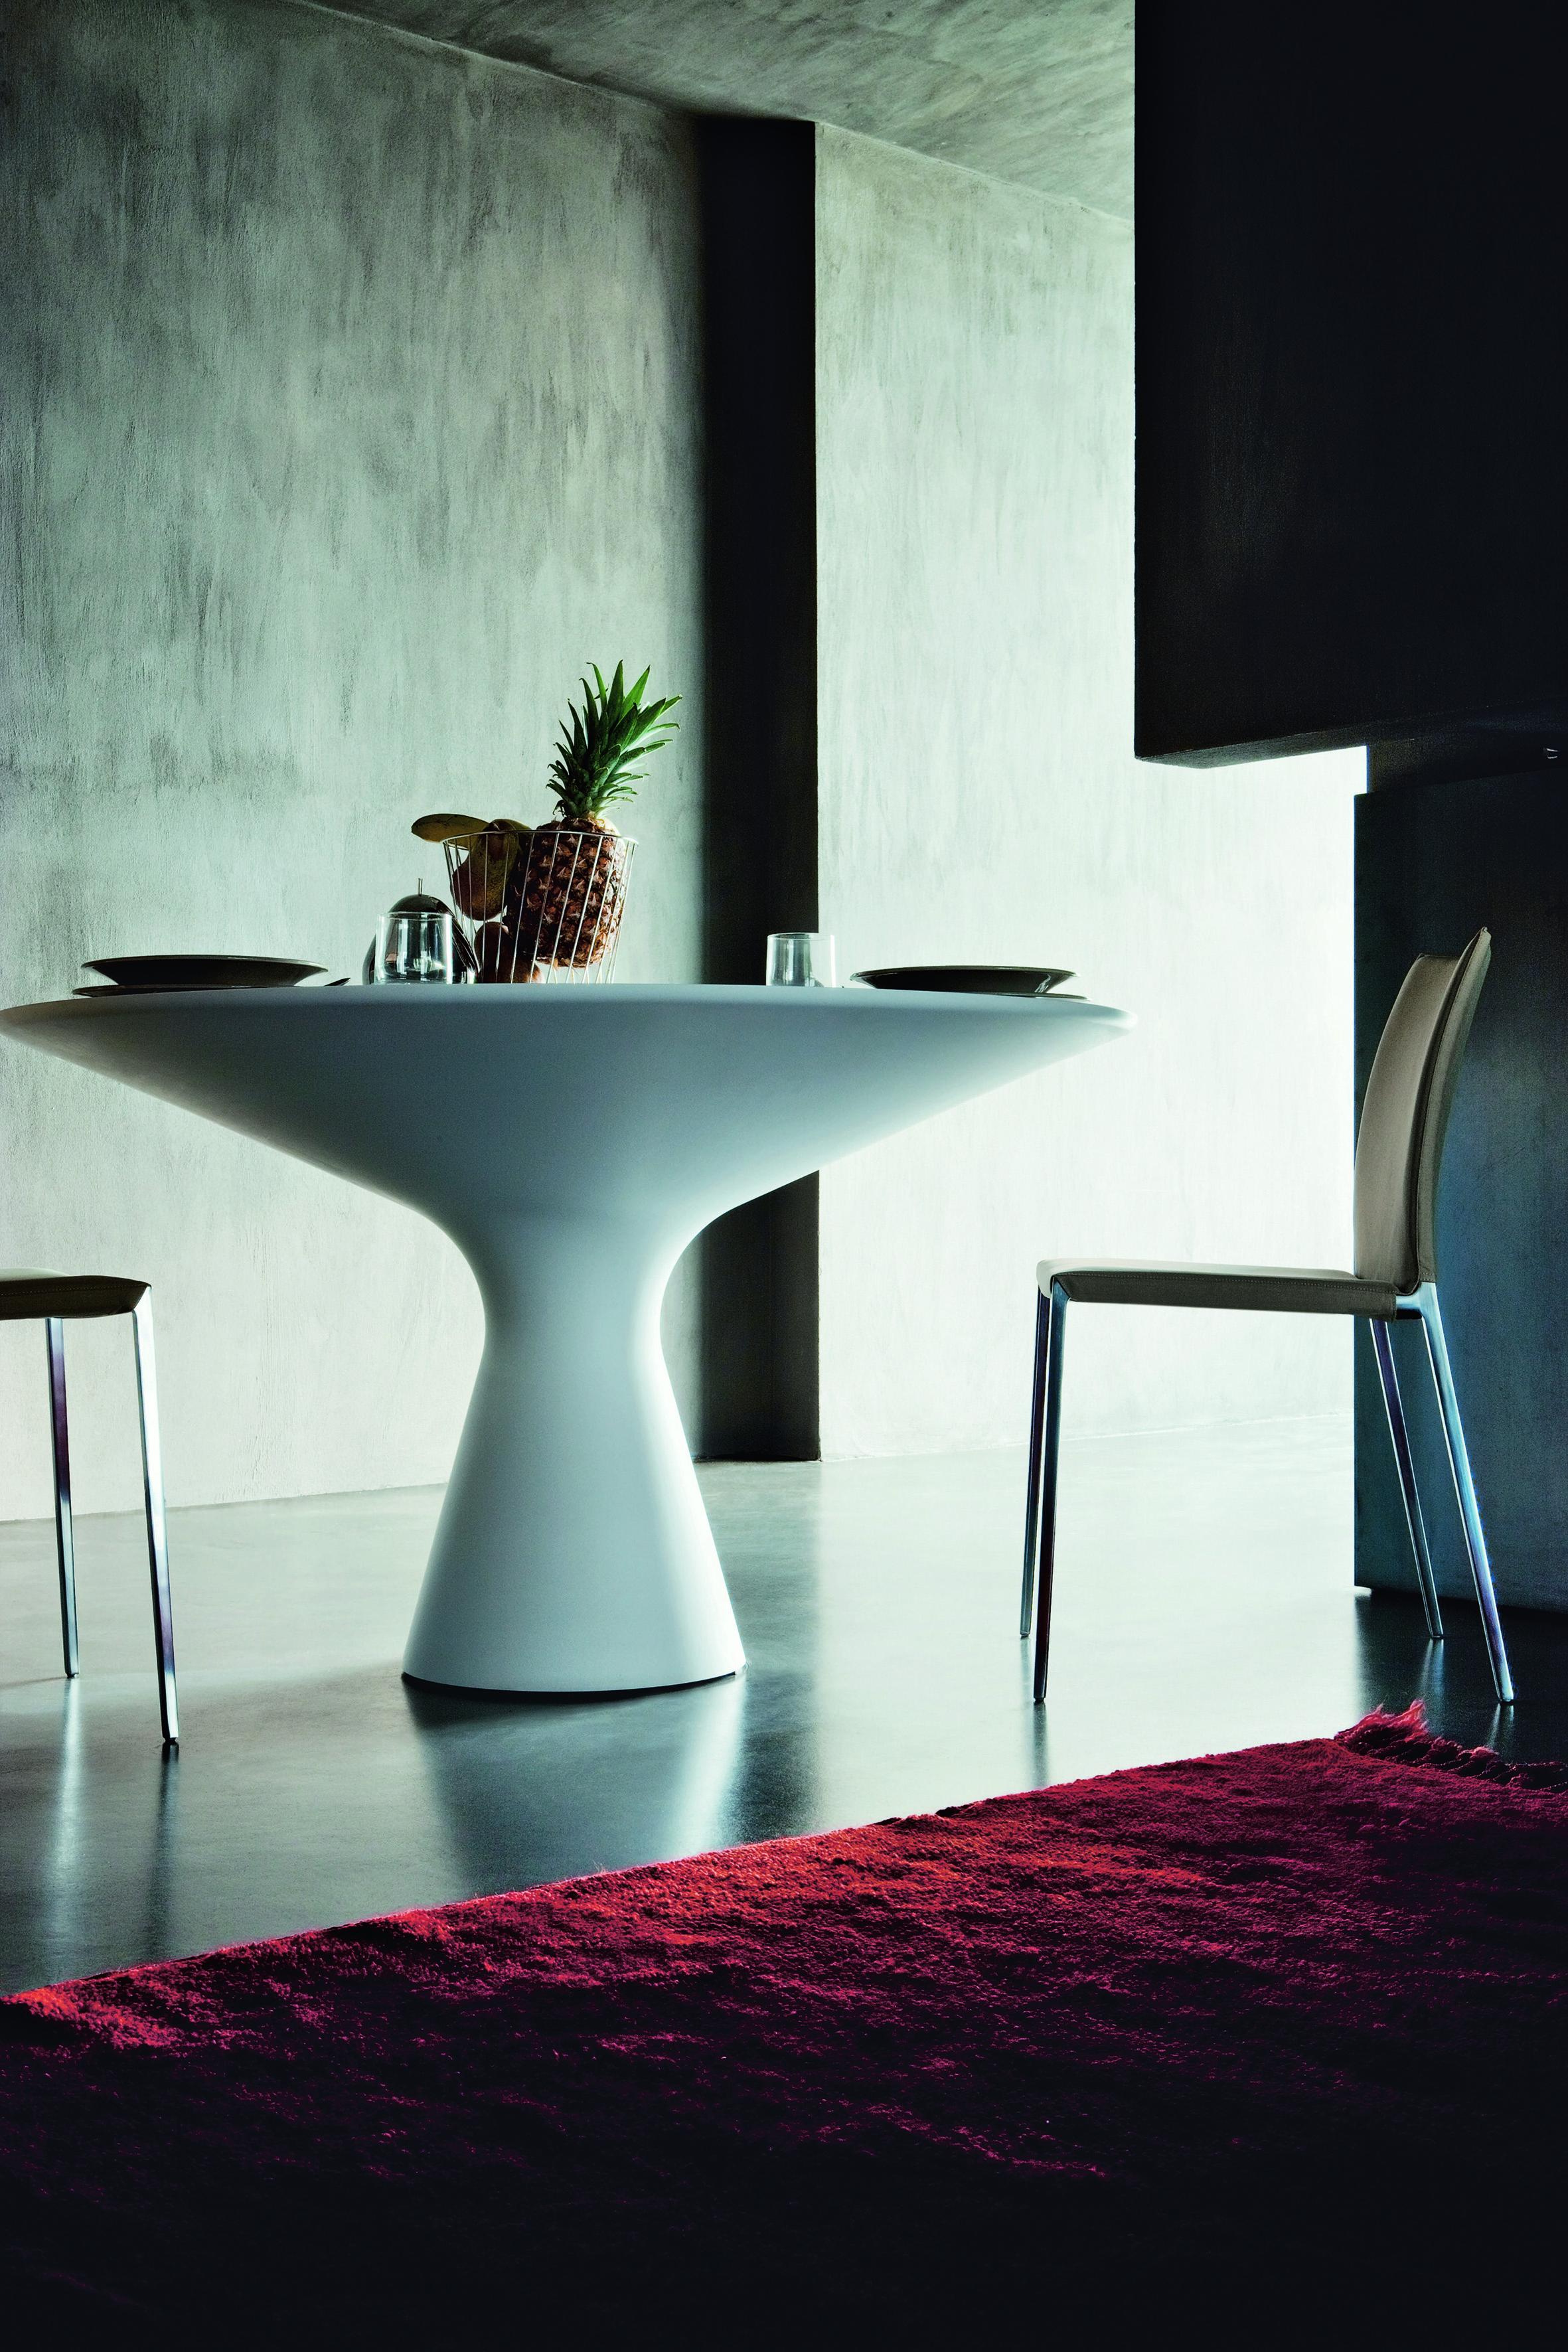 Zanotta Blanco Table in Cristalplant Top and Frame by Jacopo Zibardi

Base and top in Cristalplant®, composite material based on polyester and acrylic resins, loaded with minerals and mass pigmented in the shade of matt white.

Elegant and